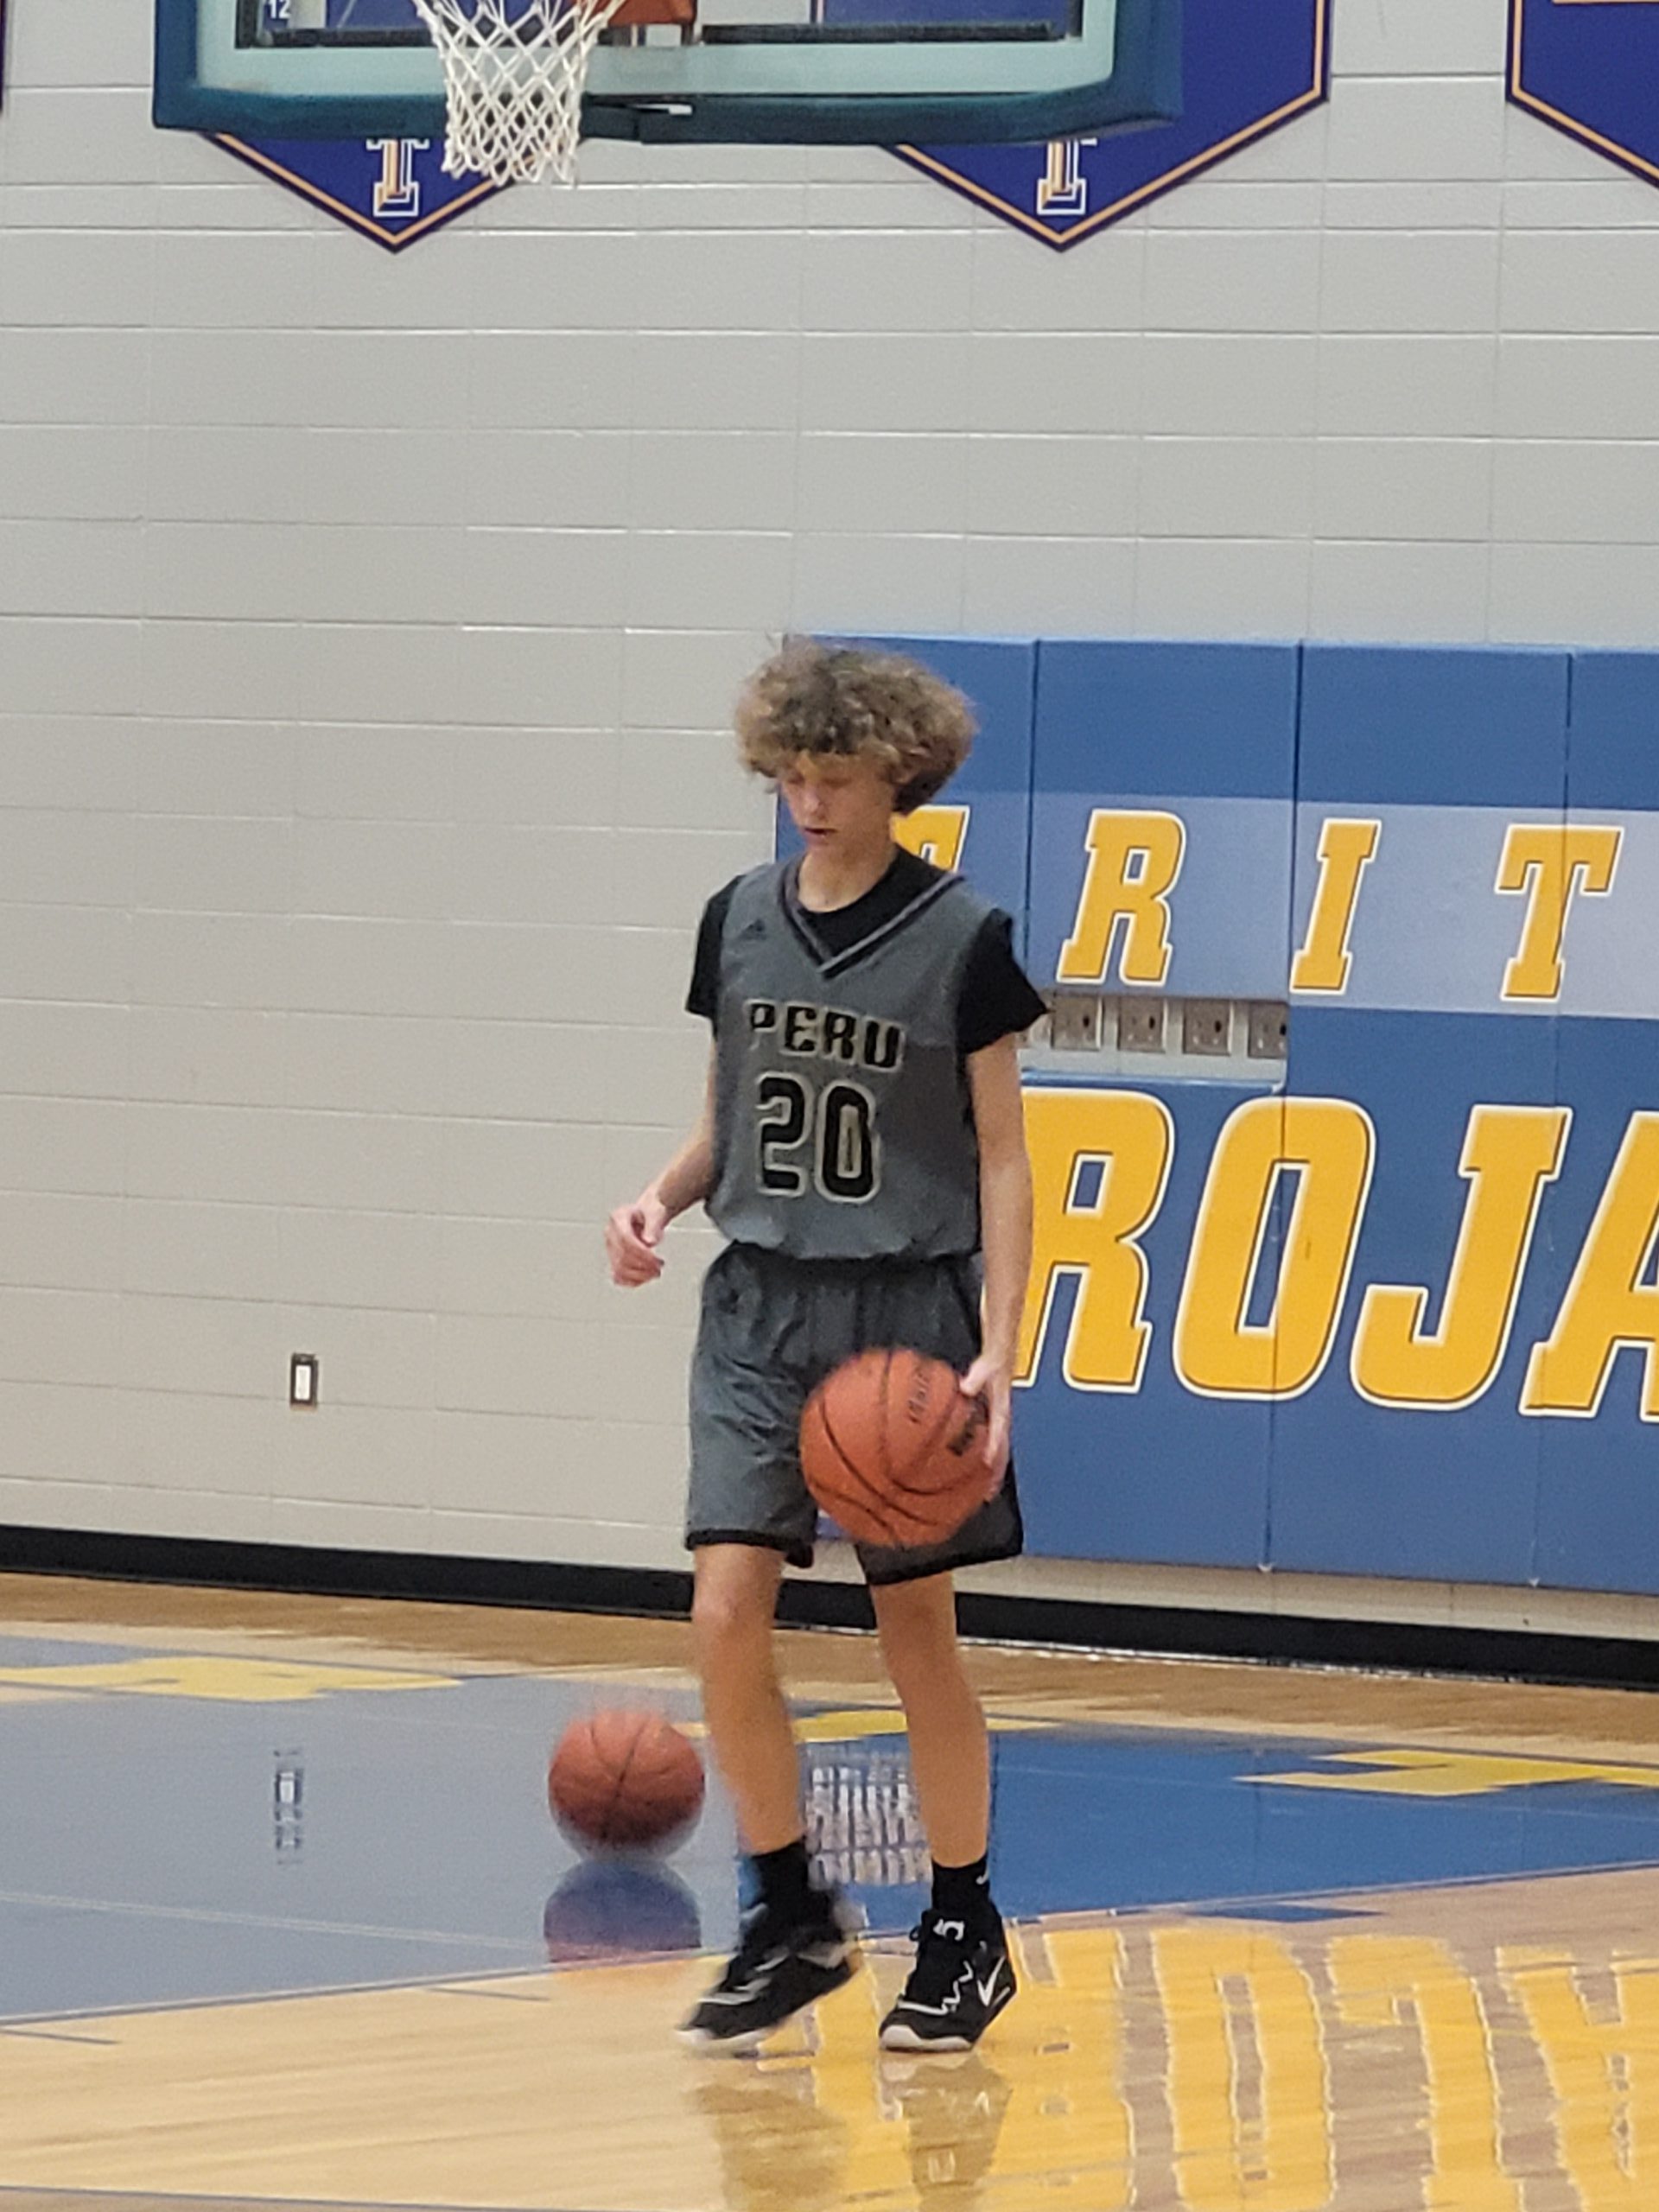 #20 Oliver Rabe dribbles the ball during warmups.